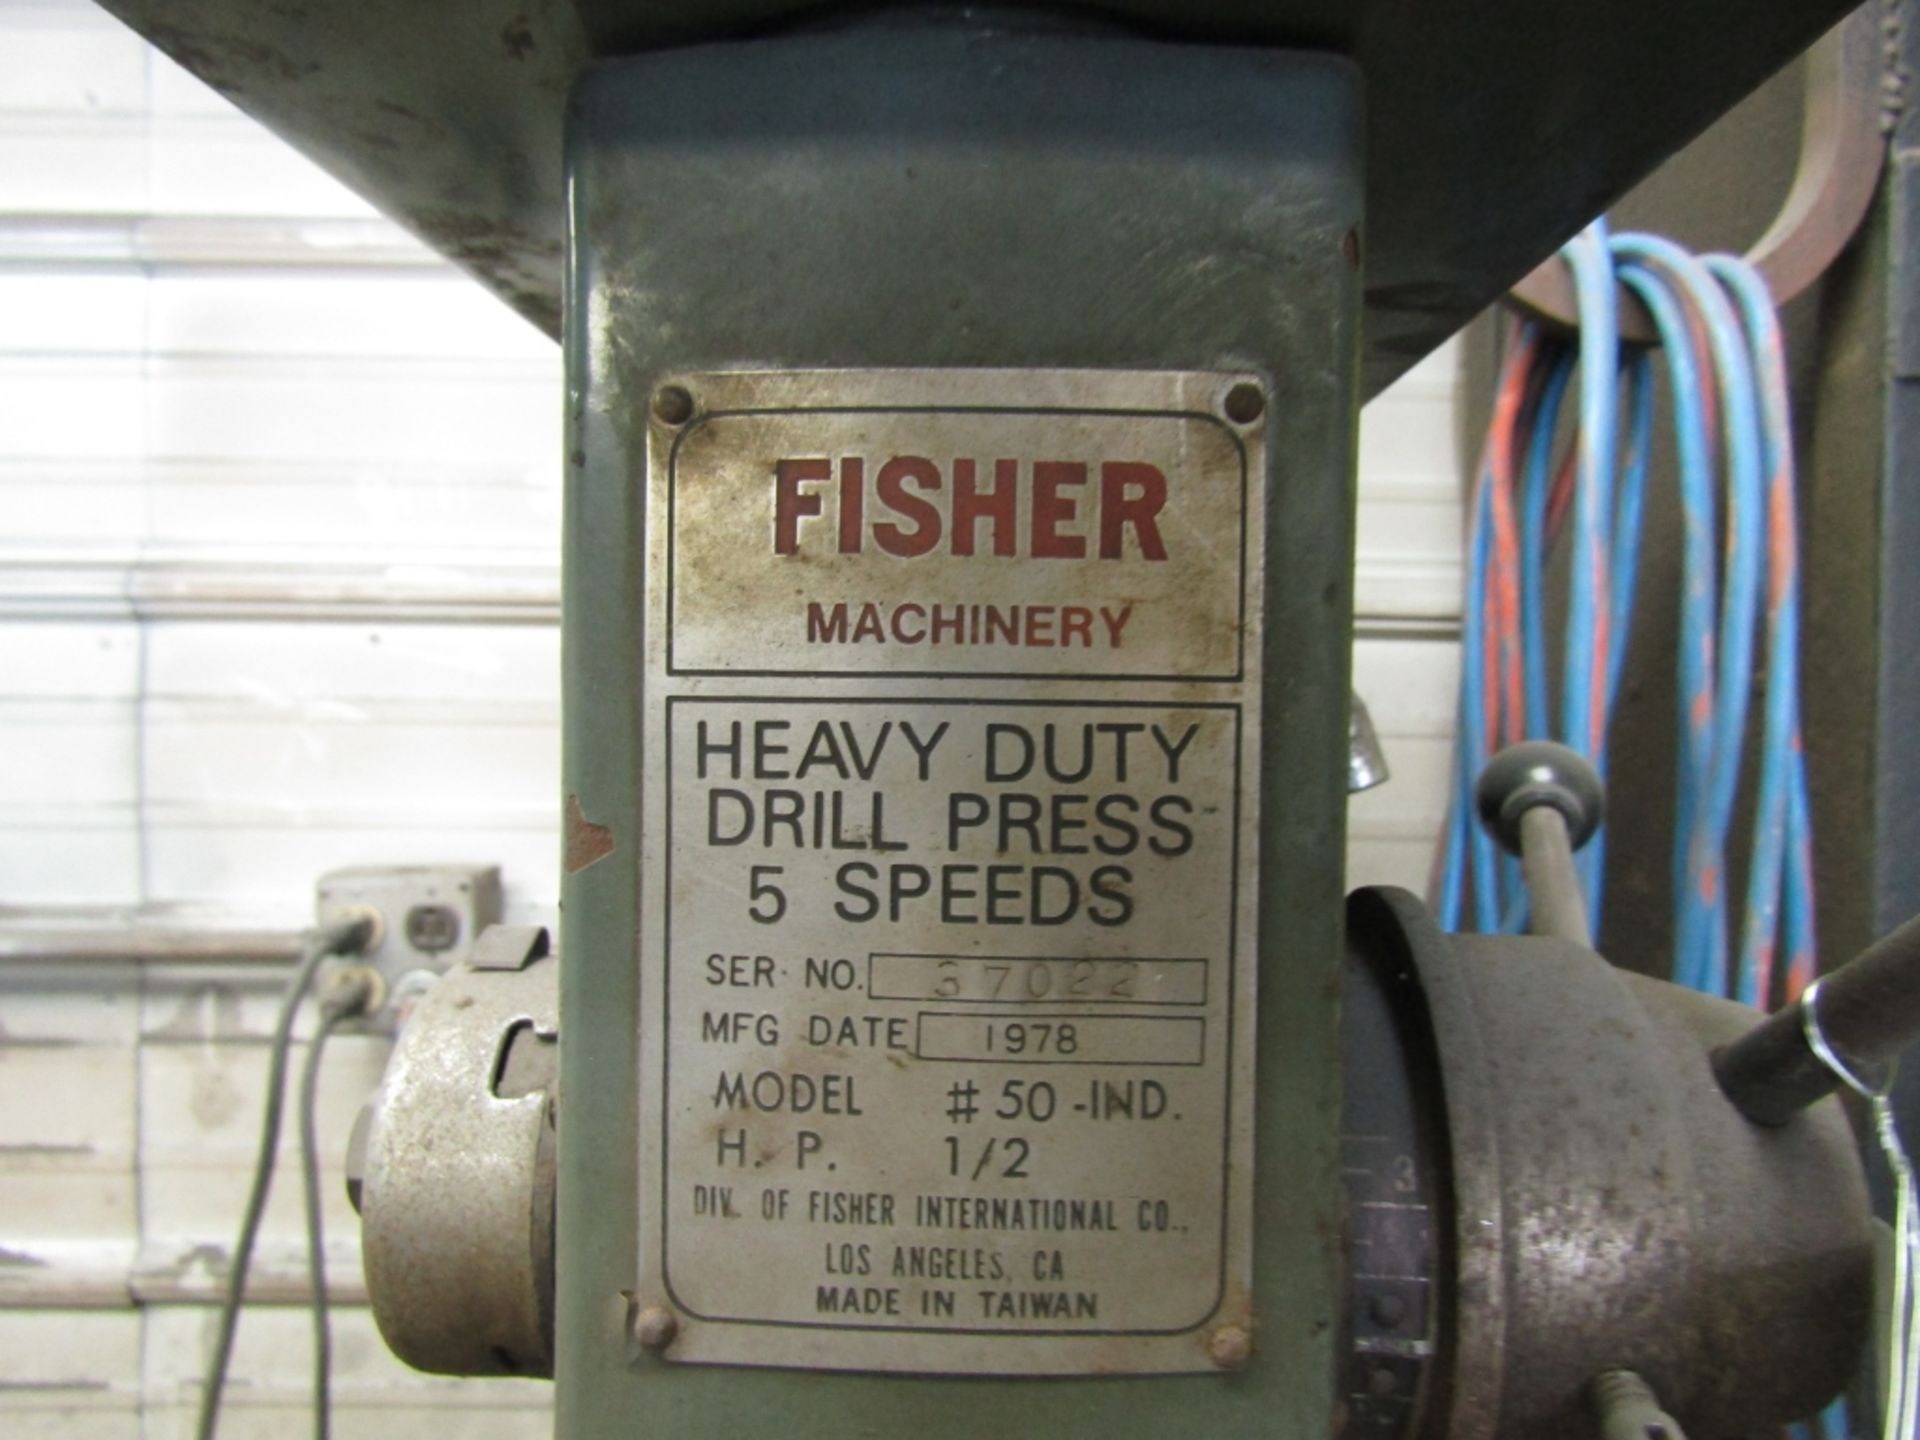 1978 Fisher Heavy Duty Drill Press, Model #50-IND, Serial #37022,, - Image 2 of 3